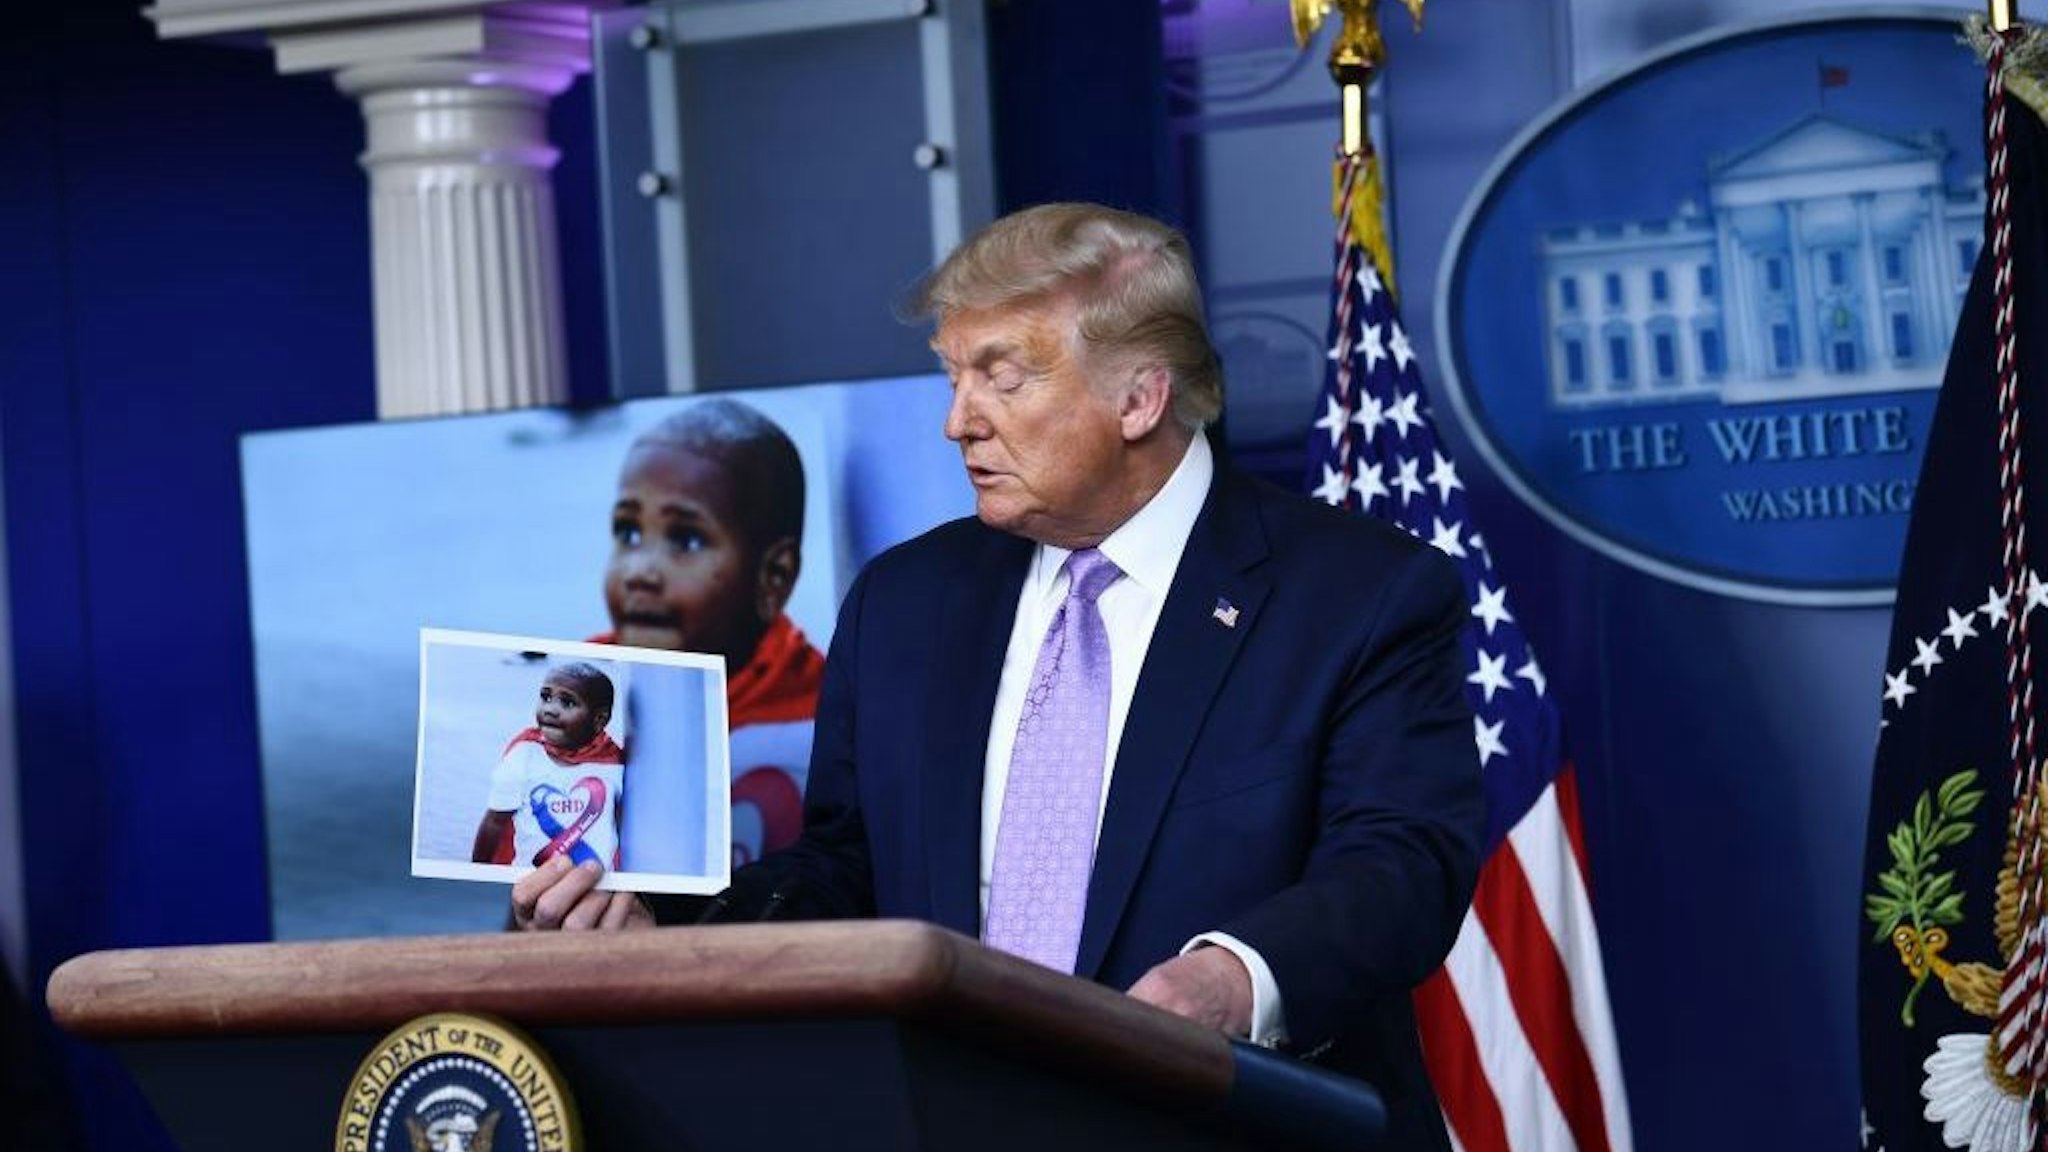 US President Donald Trump holds up a photo of LeGend Taliferro, a victim of a crime during a news conference in the Brady Briefing Room of the White House in Washington, DC, on August 13, 2020. (Photo by Brendan Smialowski / AFP) (Photo by BRENDAN SMIALOWSKI/AFP via Getty Images)